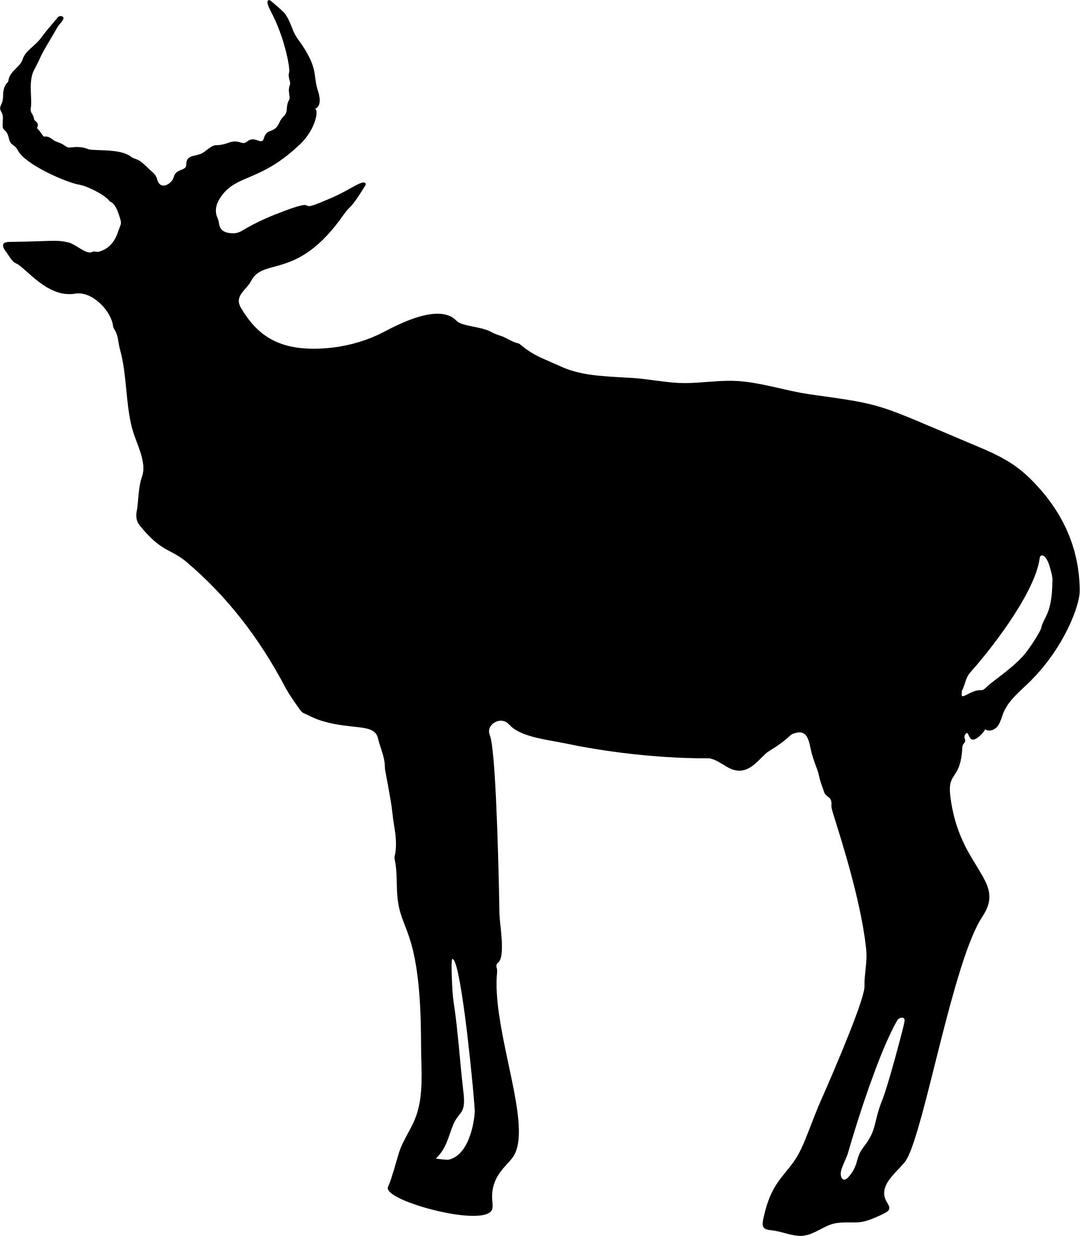 Antelope Silhouette png transparent